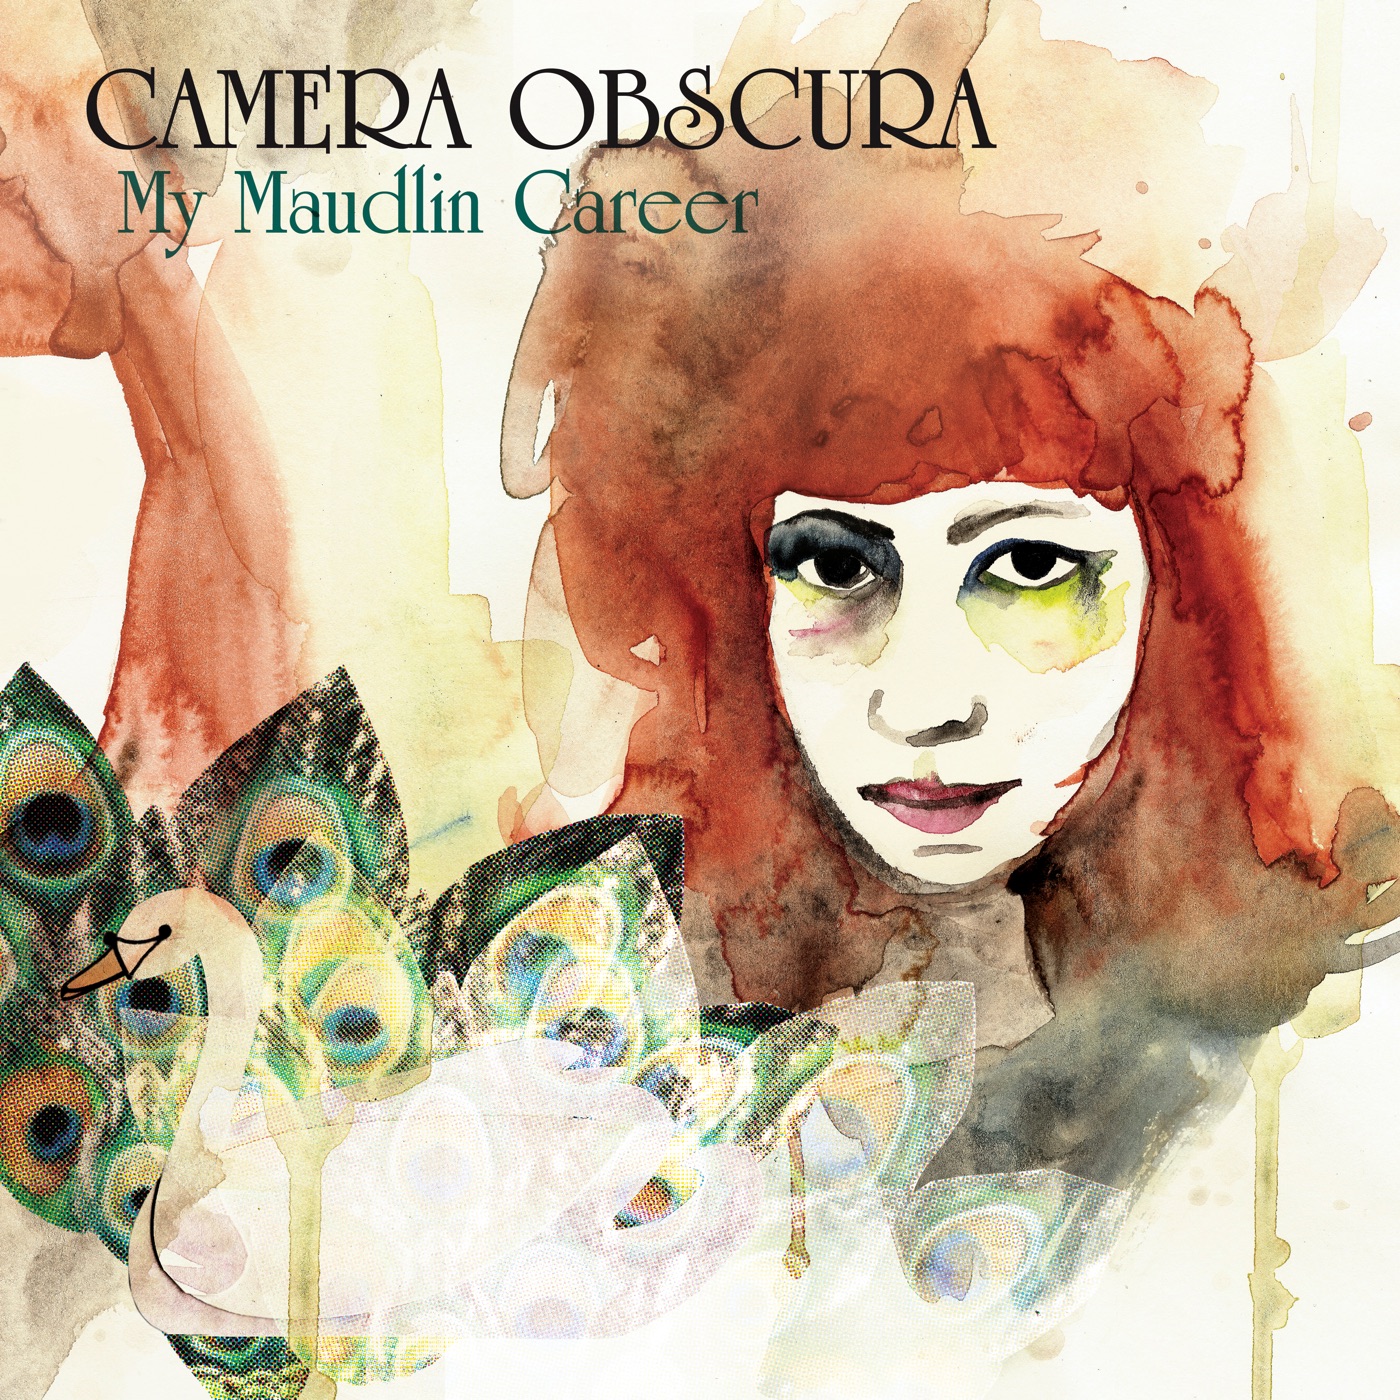 My Maudlin Career by Camera Obscura, My Maudlin Career